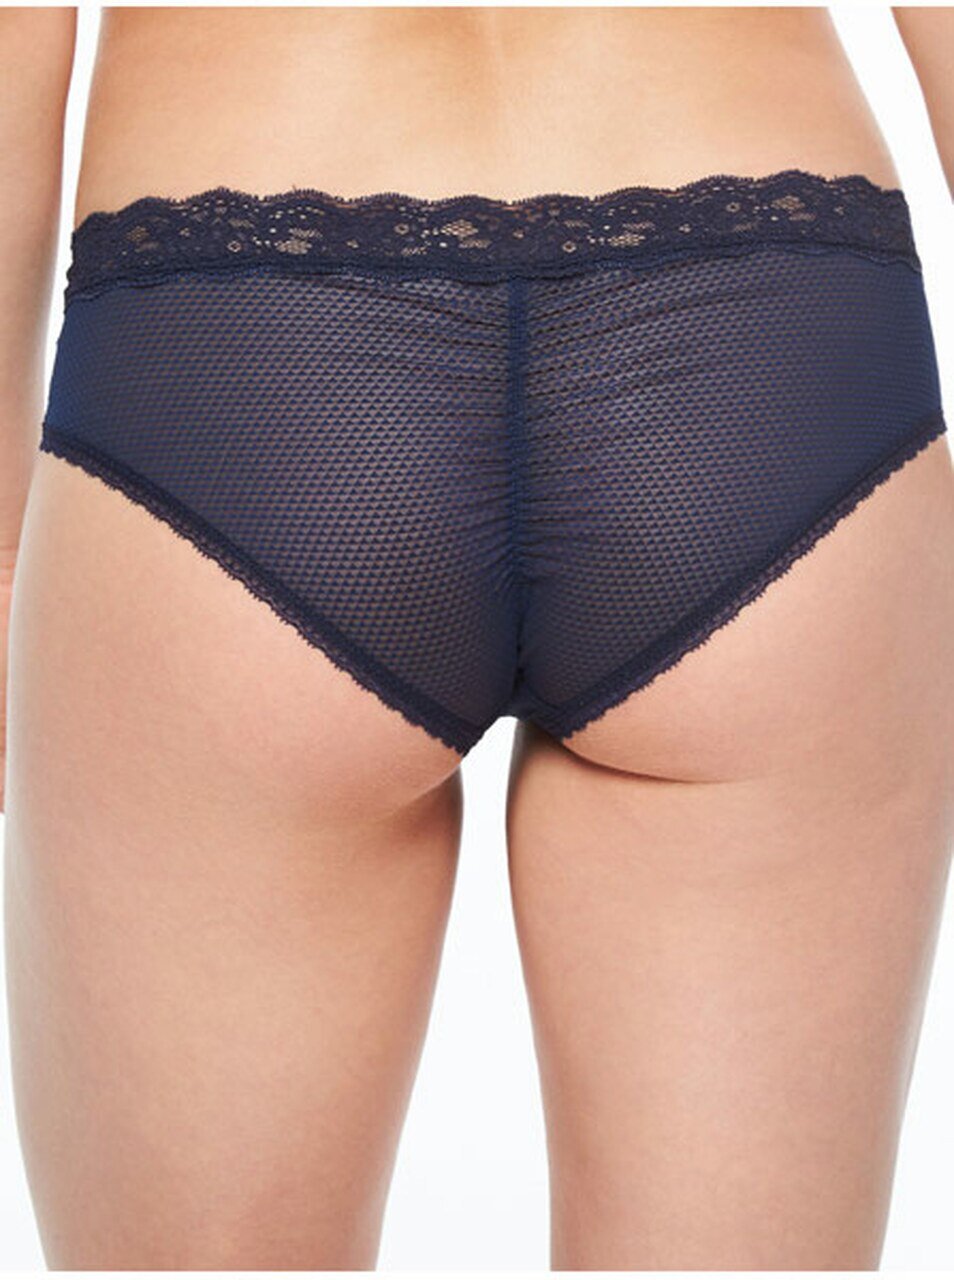 Passionata Brooklyn Short Knicker - Briefs  Available at Illusions Lingerie